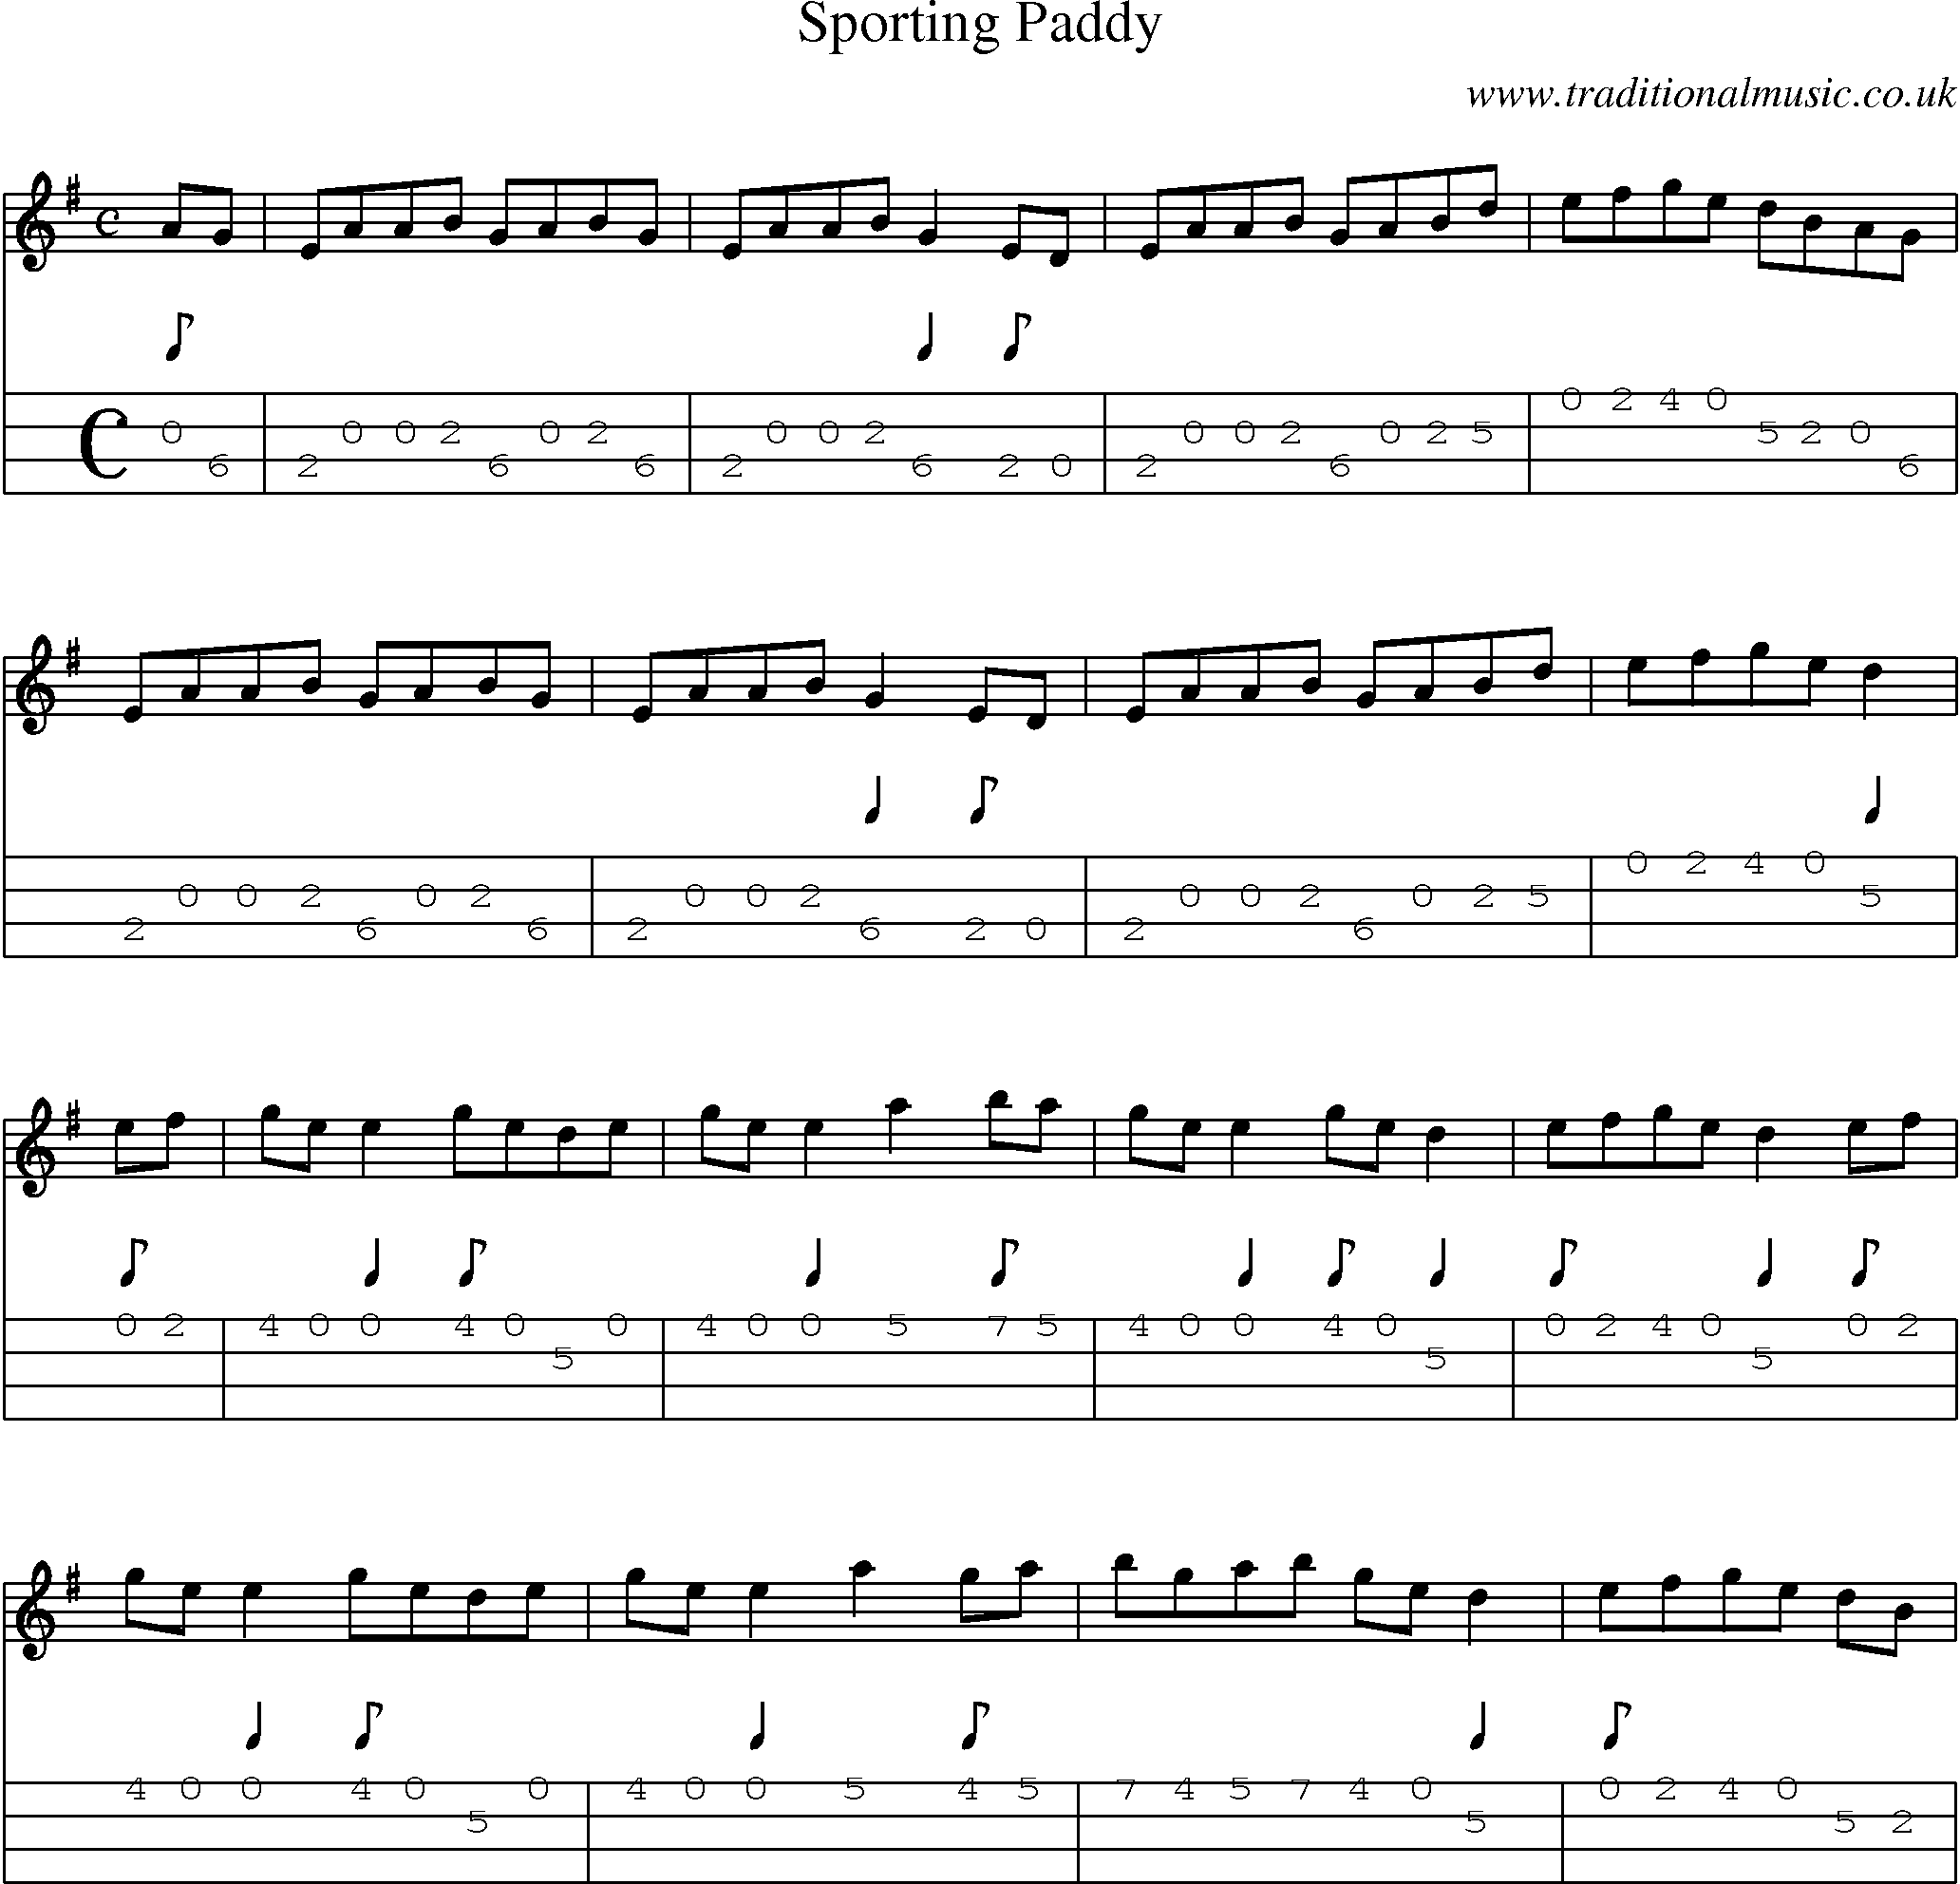 Music Score and Mandolin Tabs for Sporting Paddy